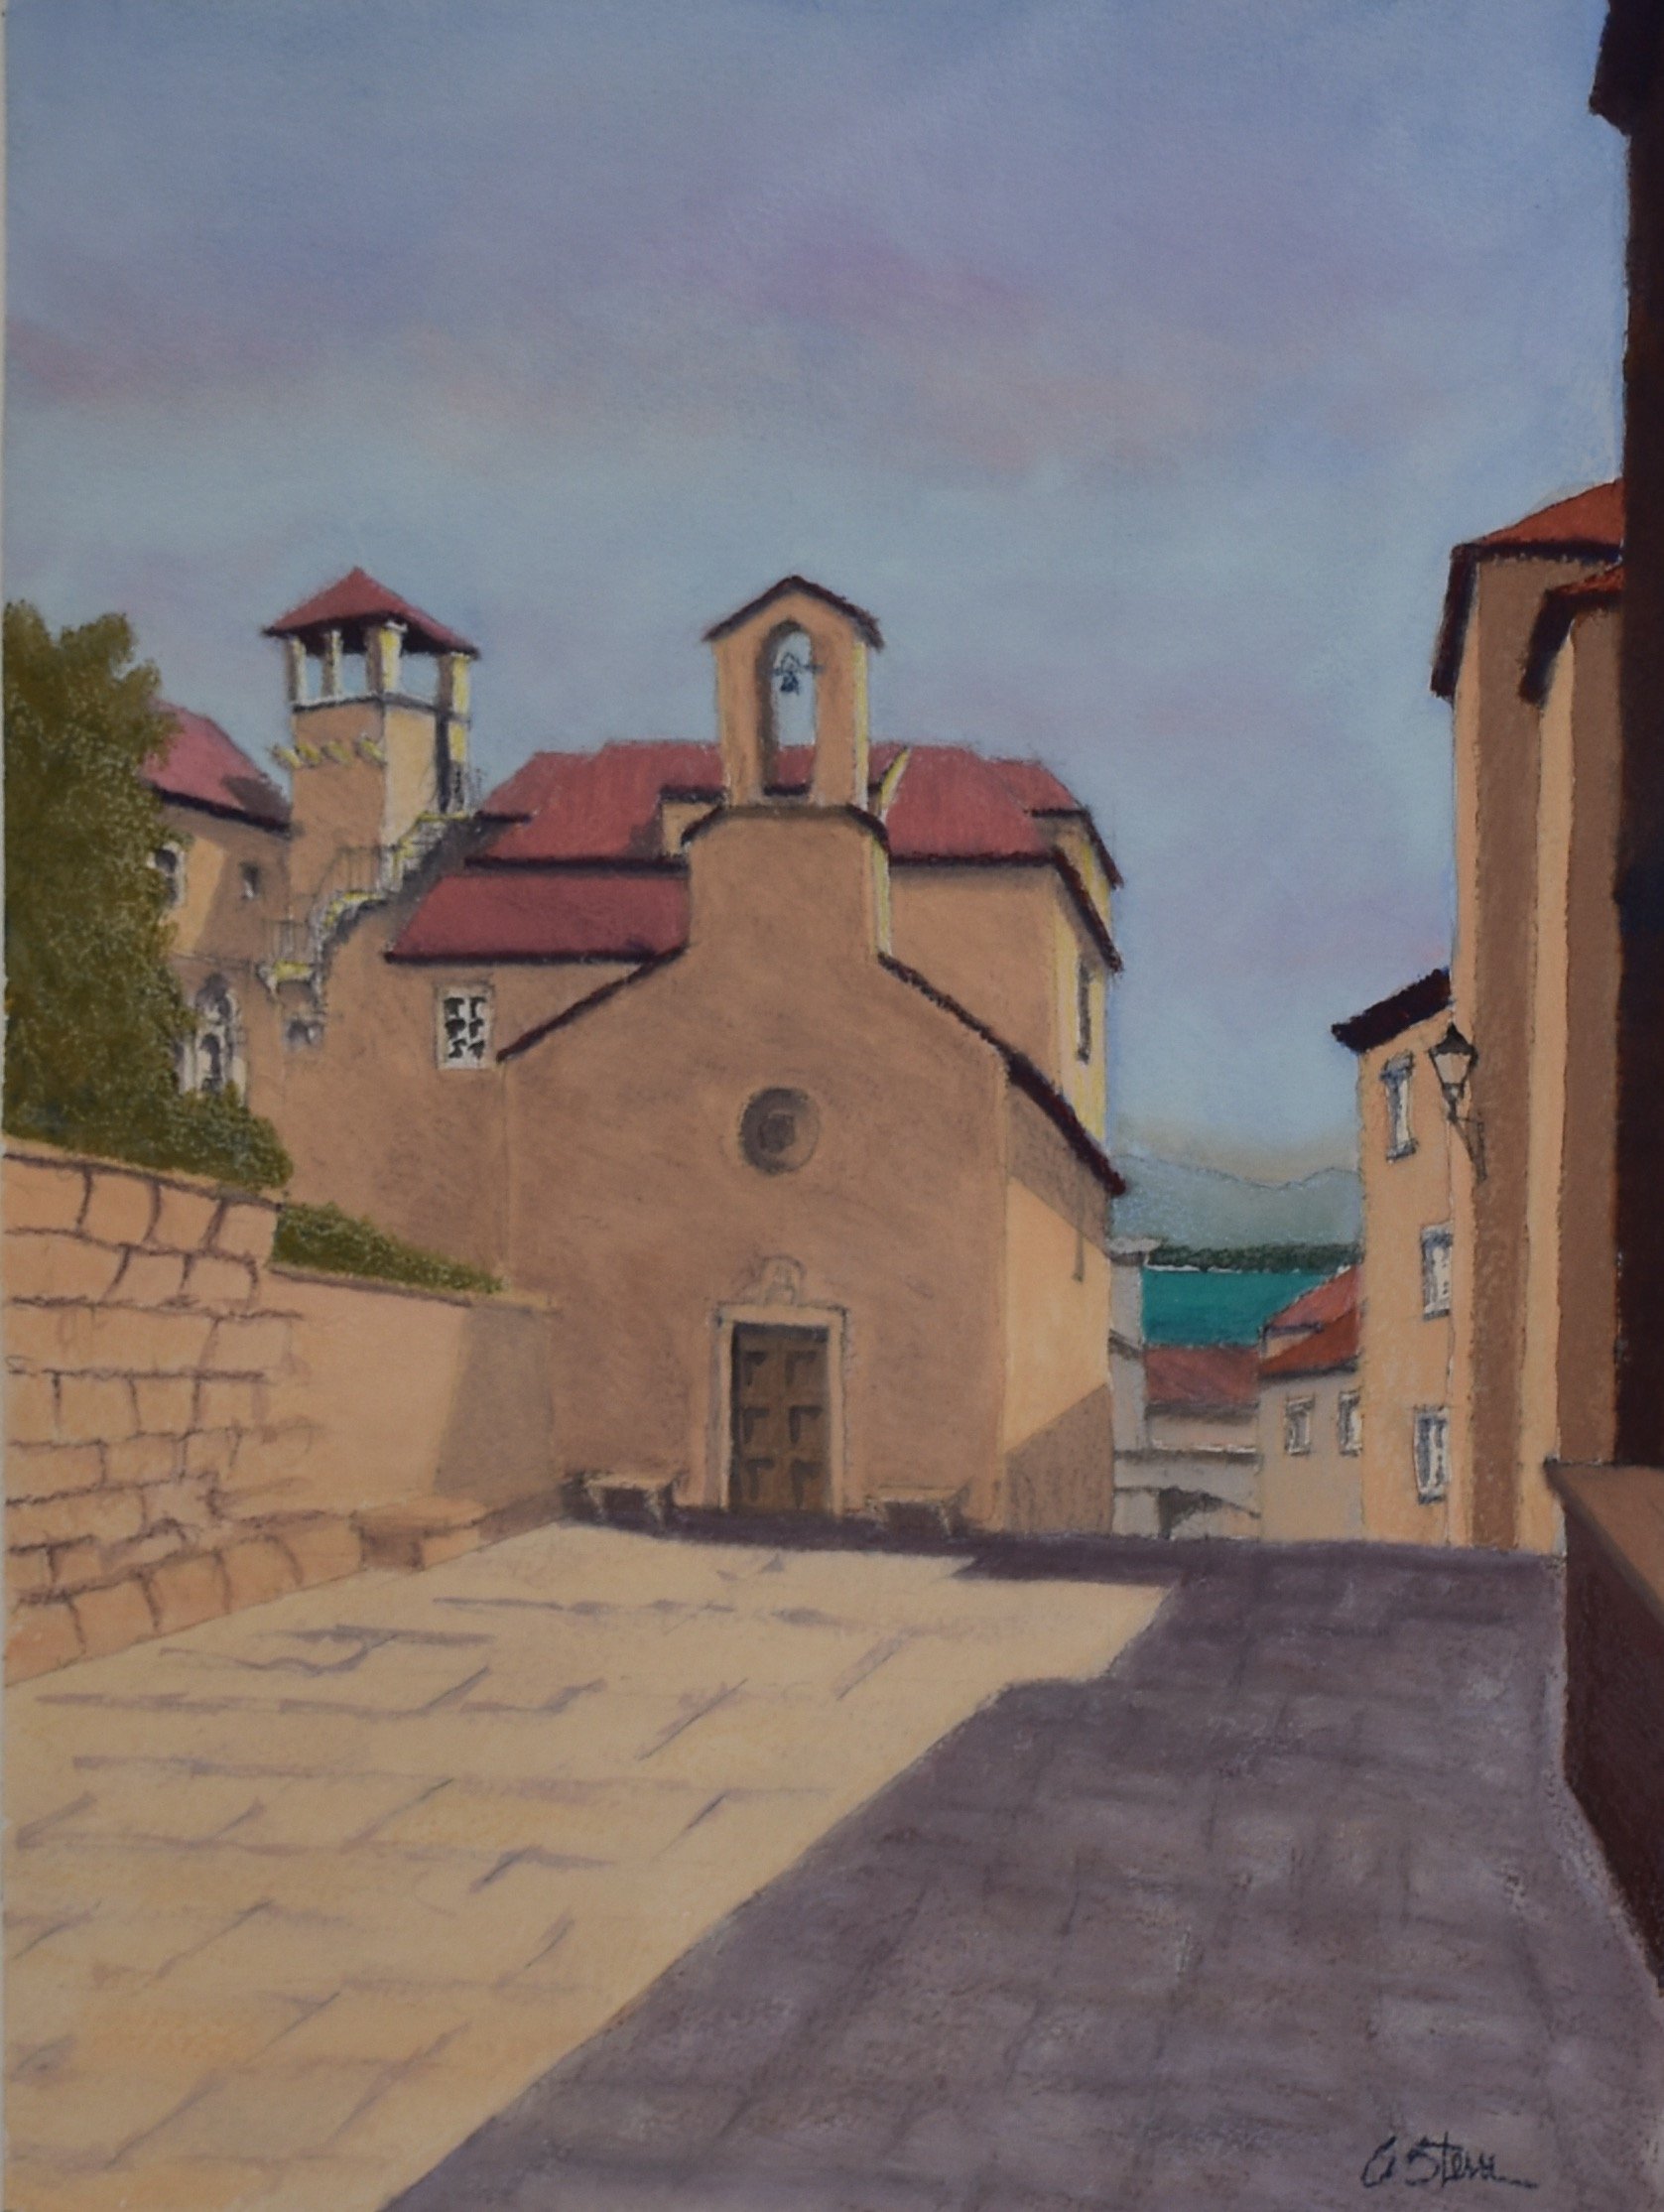  Unfinished Facade,Korcula, 2022  pastel on paper, 12x16 inches 